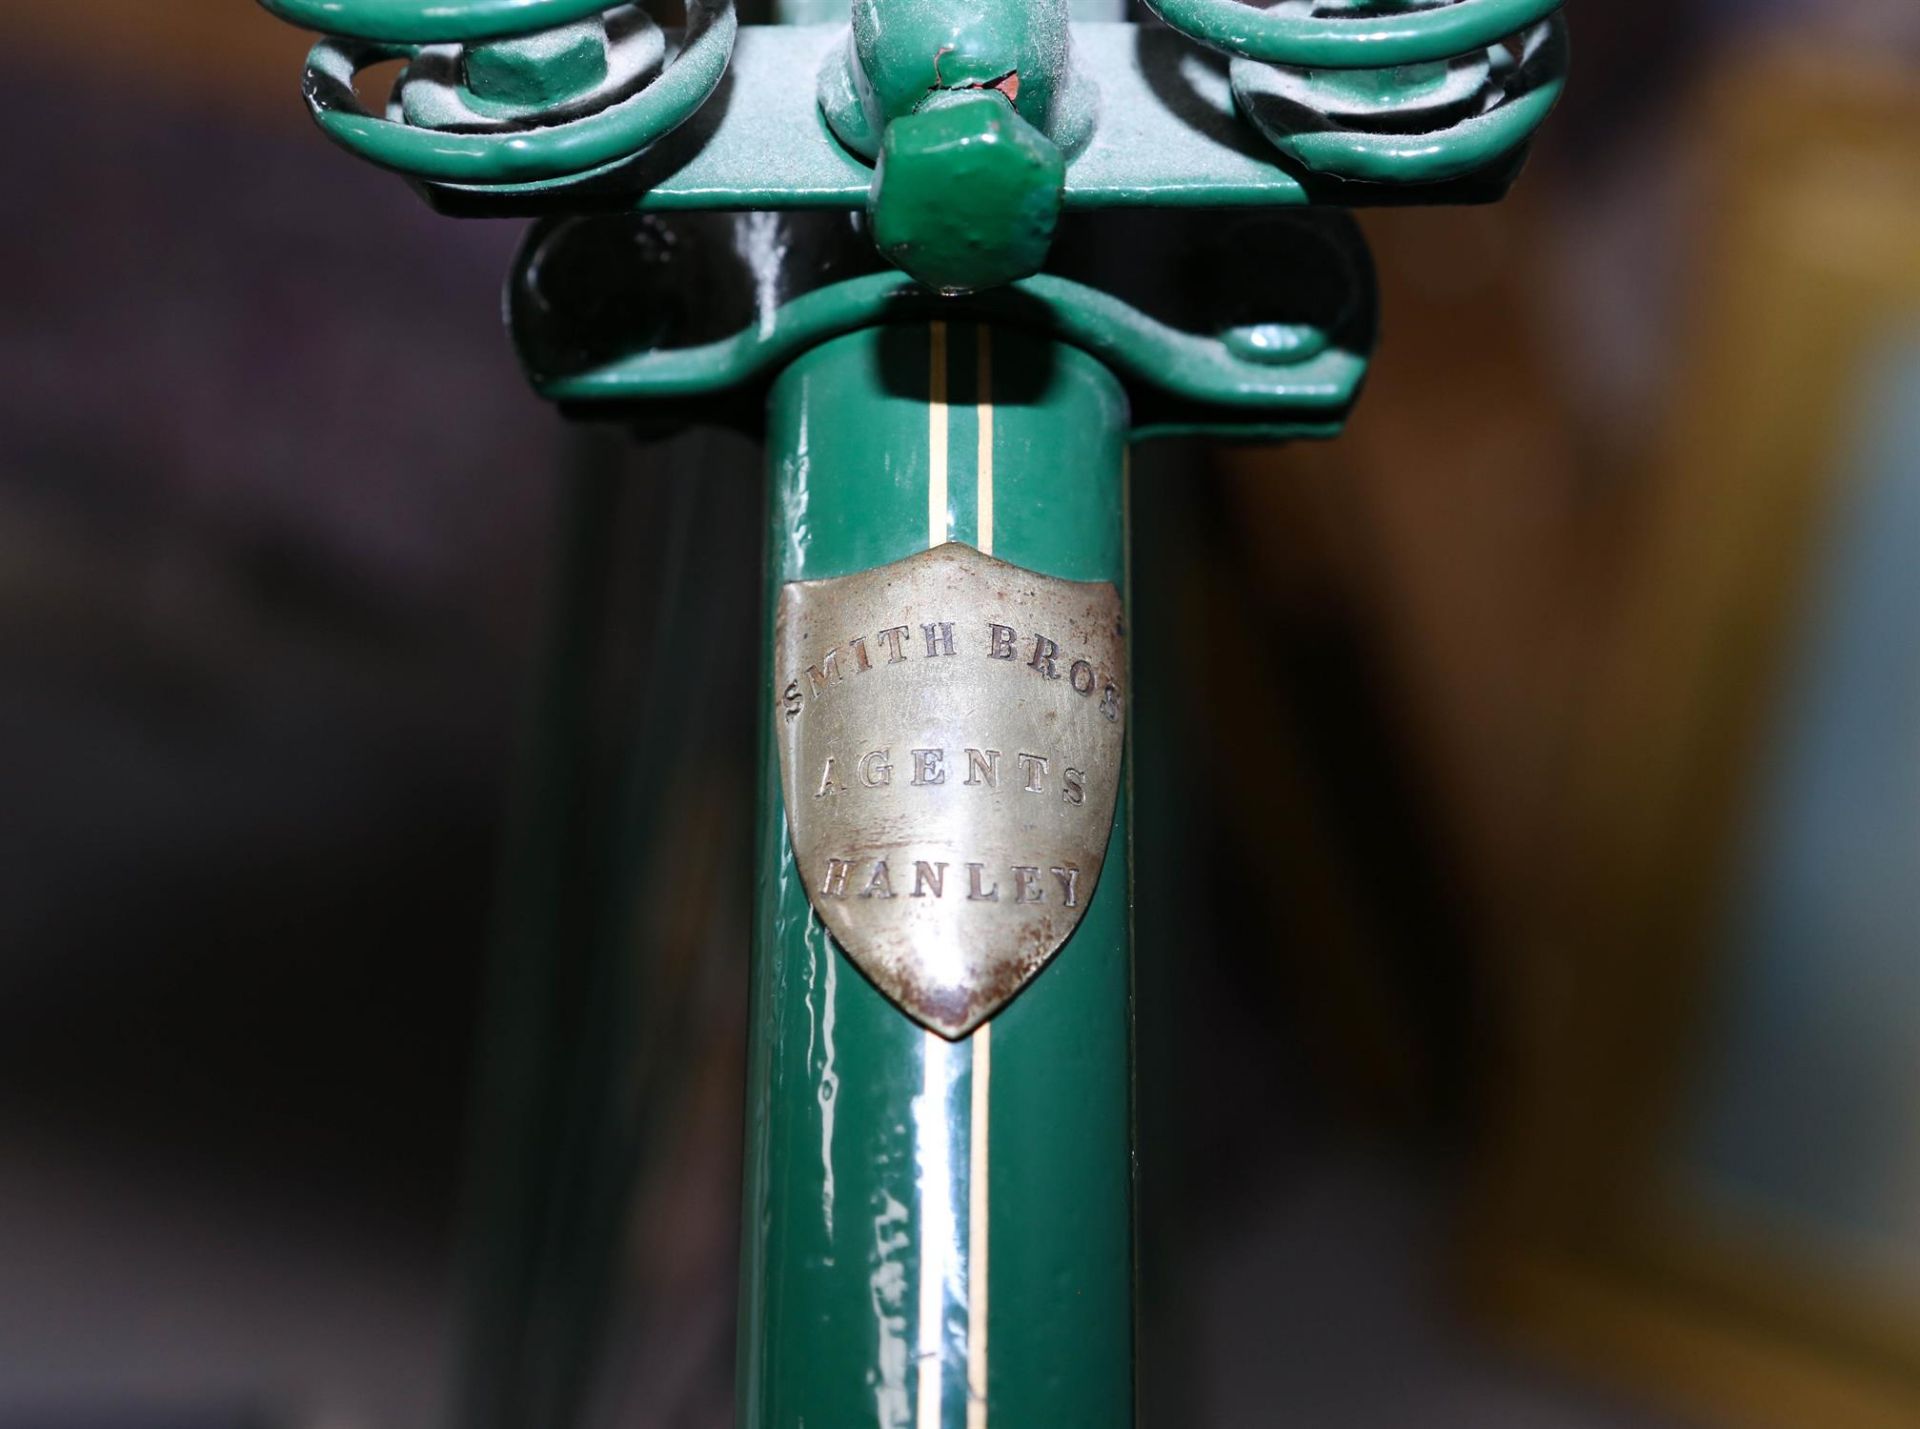 A penny-farthing / ordinary bicycle, with green painted steel frame, applied with shield to - Image 2 of 3